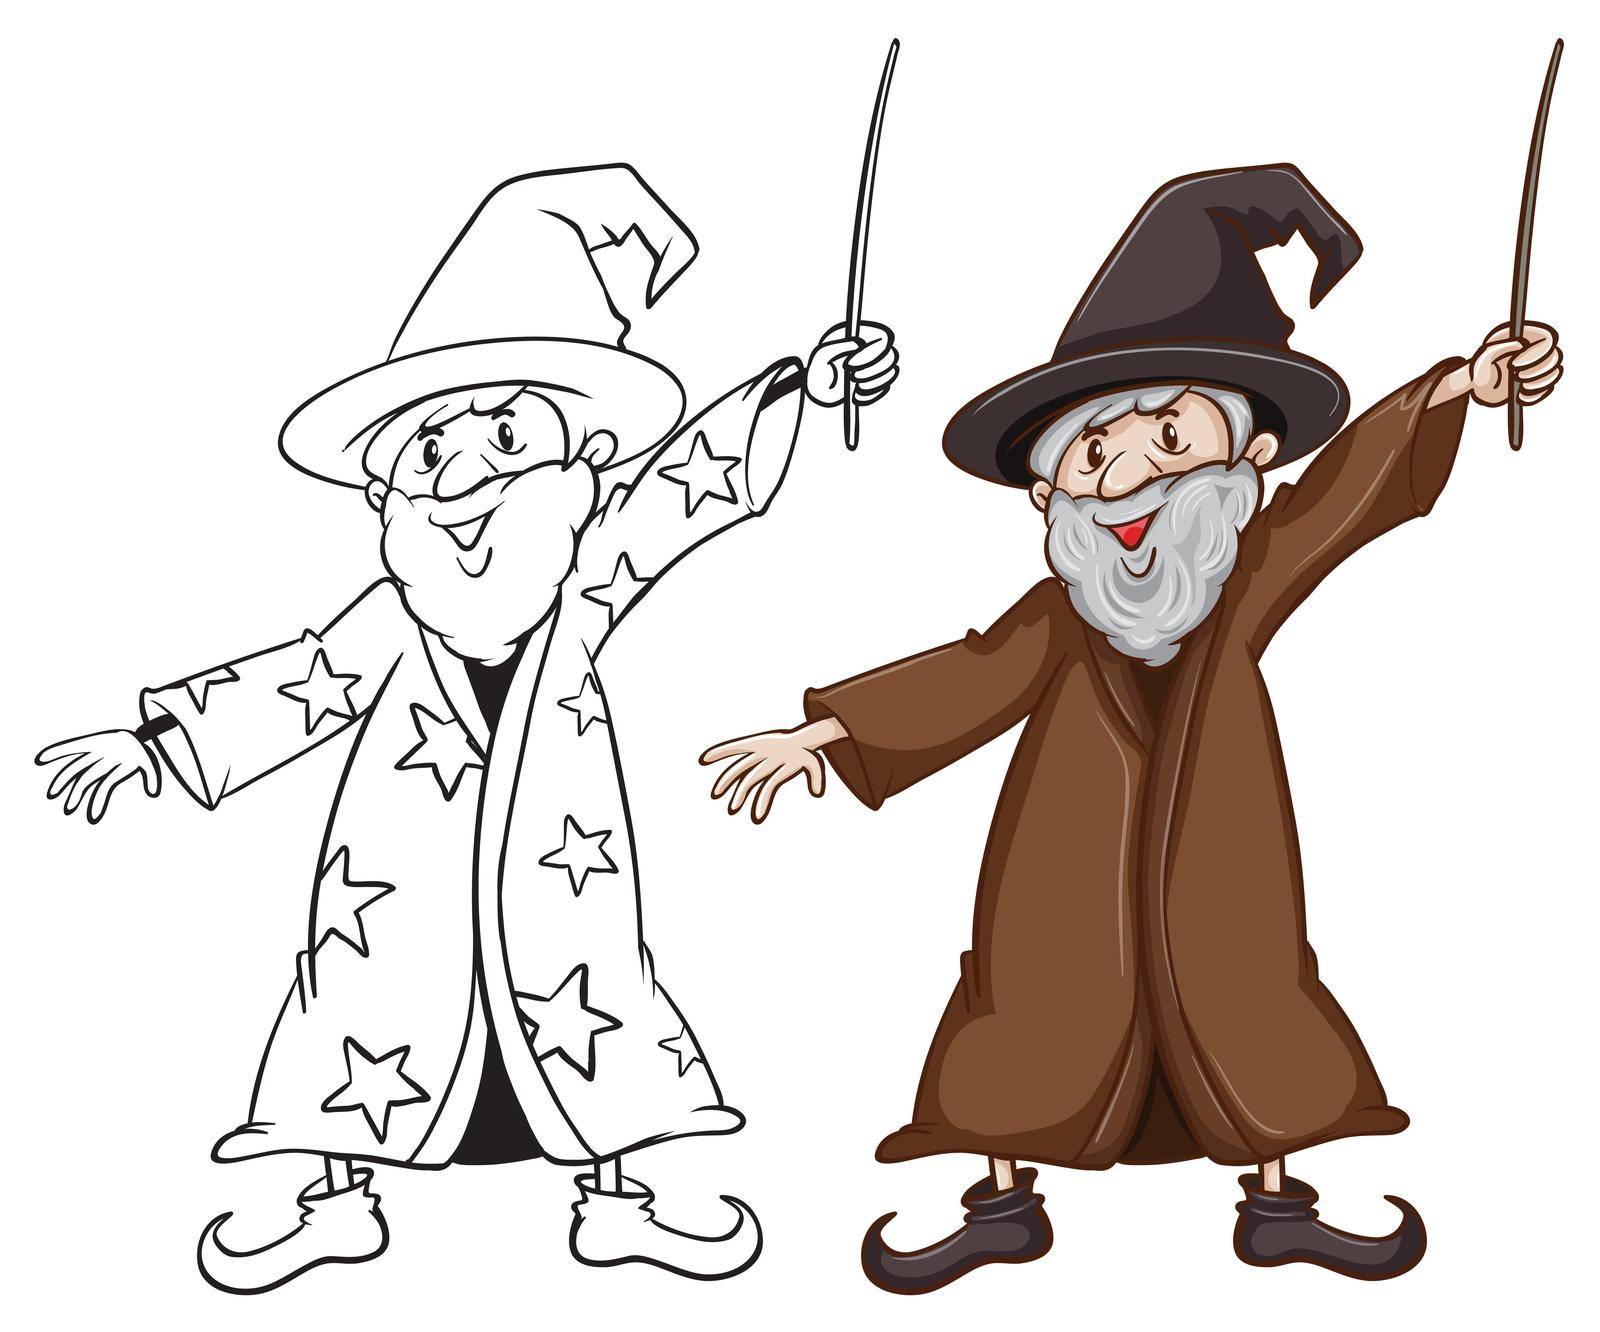 Illustration of the sketches of a wizard in two colours on a white background